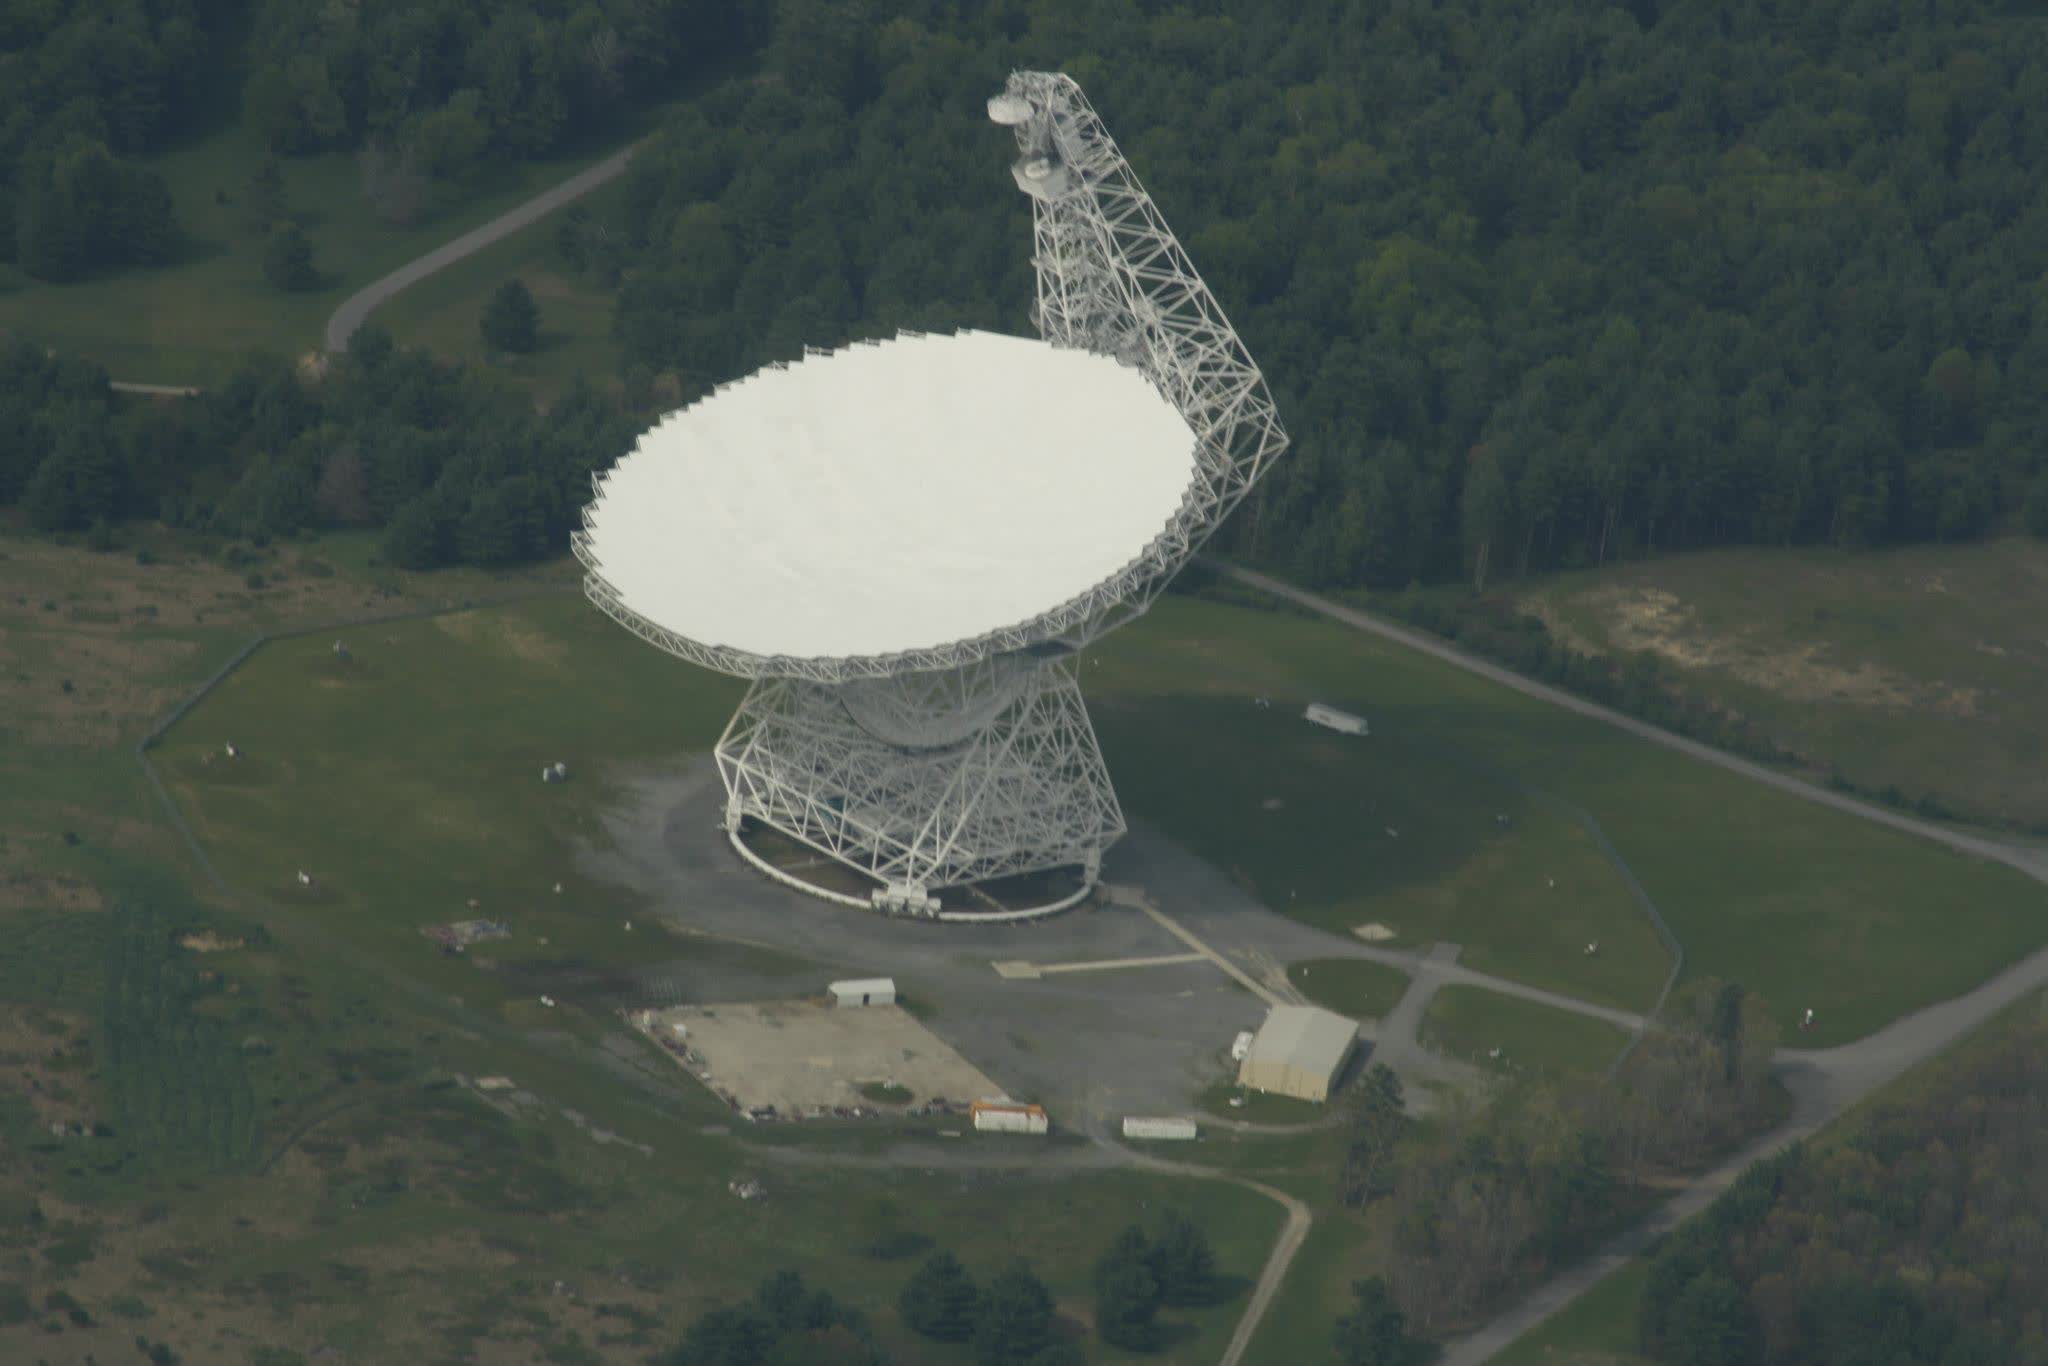 Researchers say satellite radio signals can impede astronomy